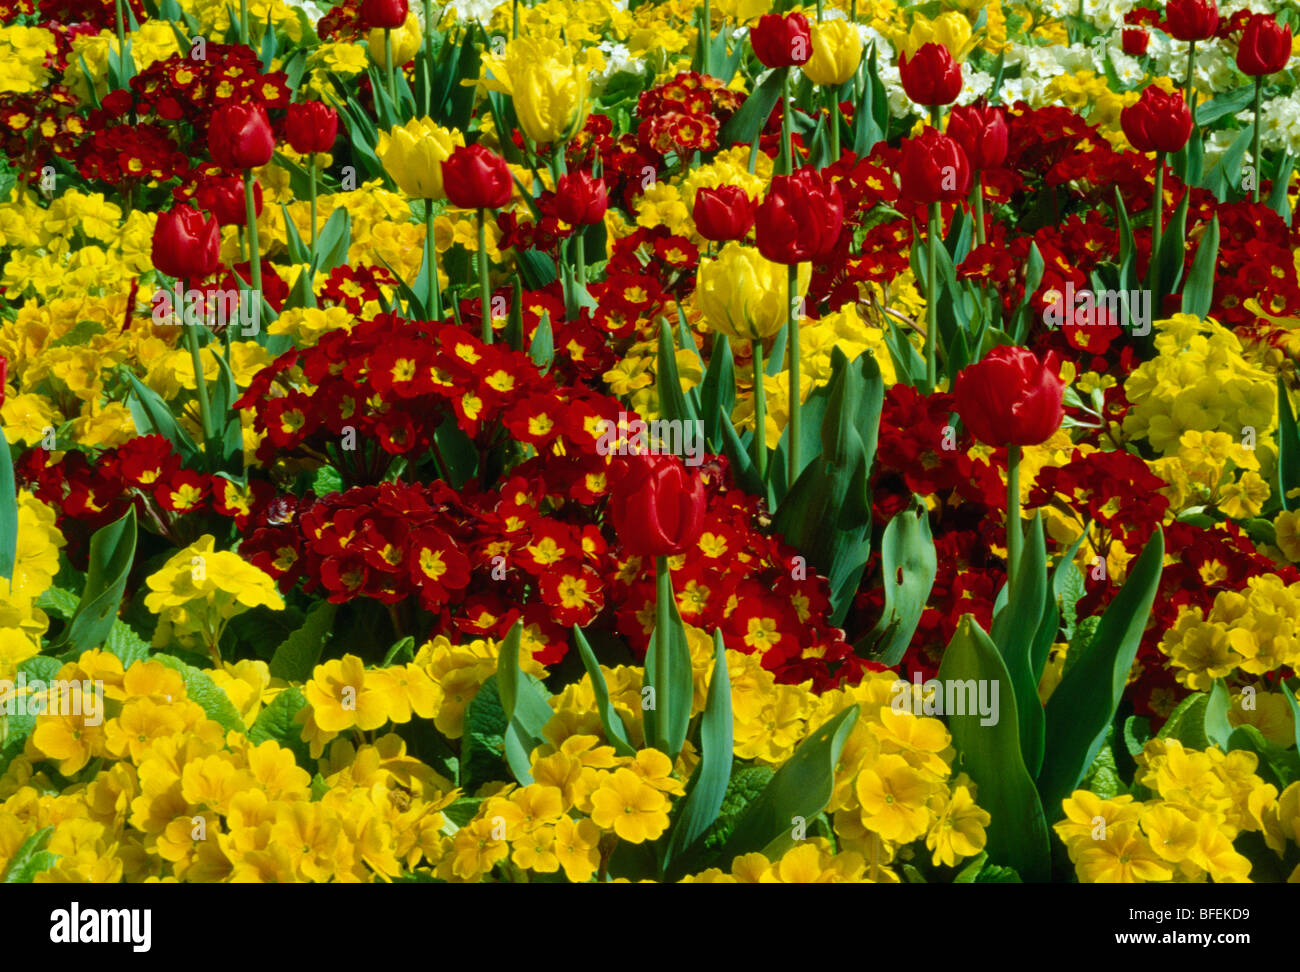 Close-up of red and yellow primula polyanthus in spring border with red tulips Stock Photo